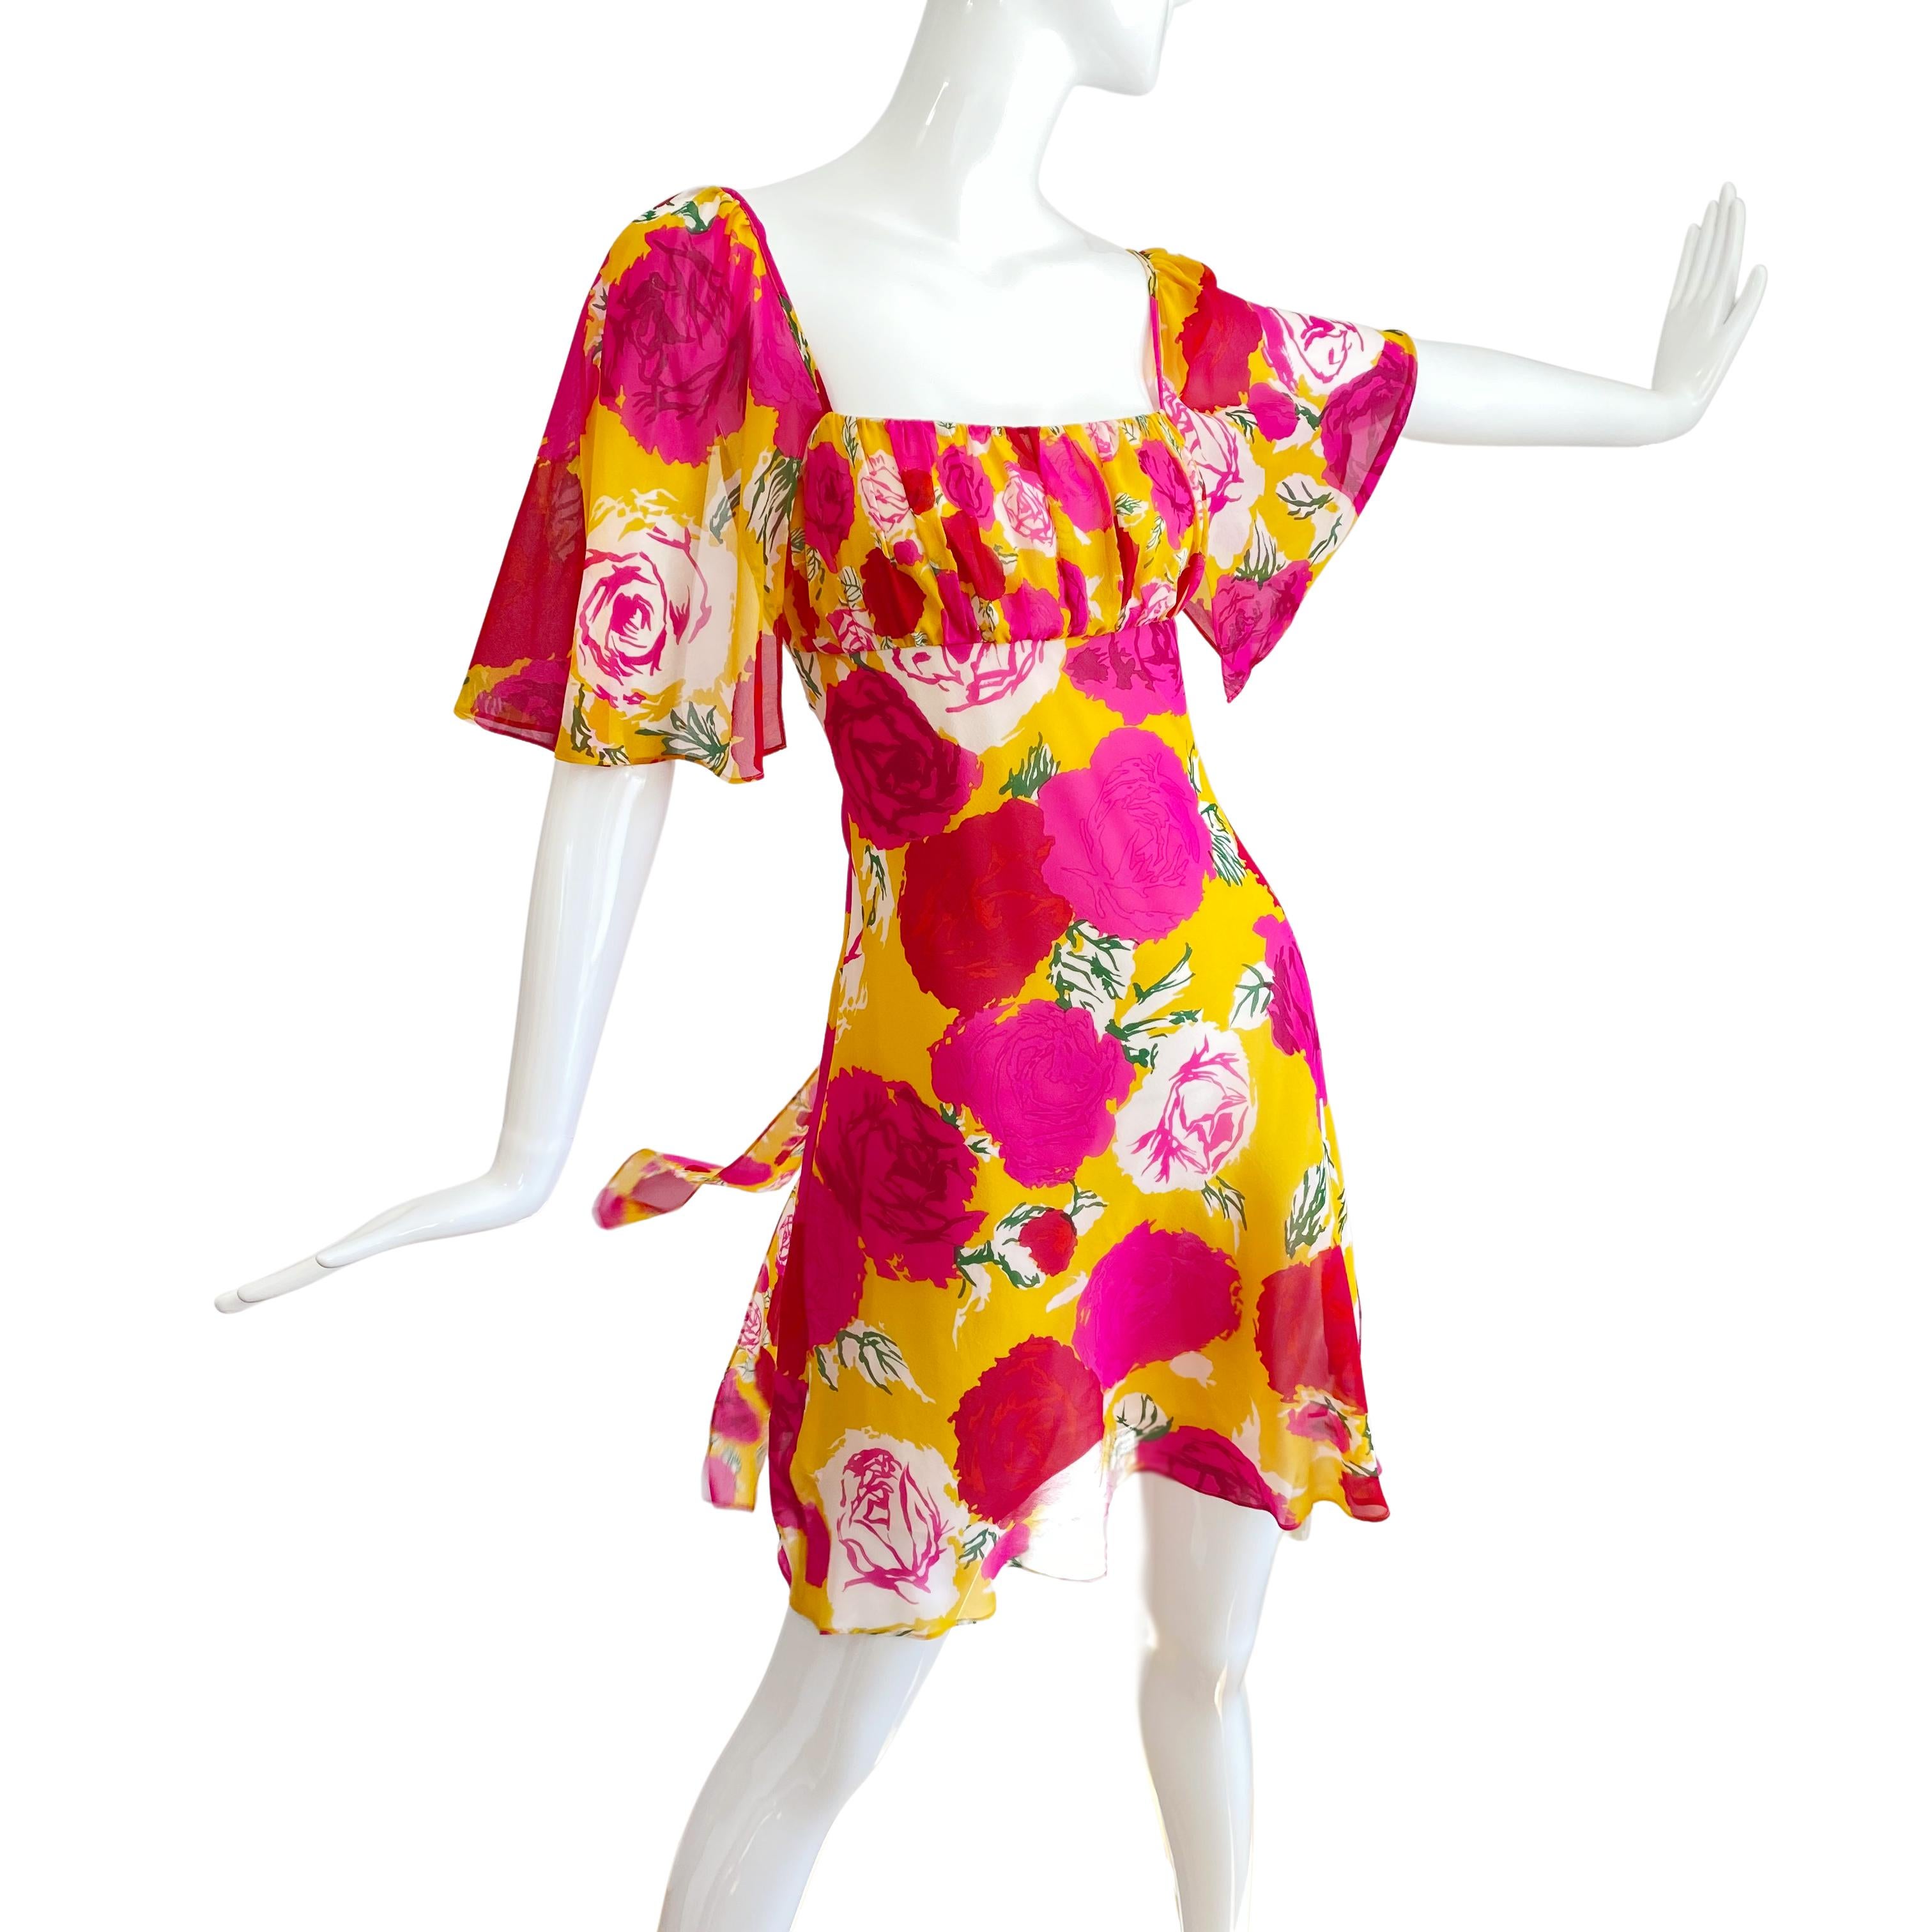 Beautiful hand-designed mix climbing rose print - this is one of Flora's personal favorite dresses.
Smaller roses at bust and tie, big roses for skirt and sheer sleeves.
Lined except for sleeves.
Invisible side zipper, ties at back for a perfect